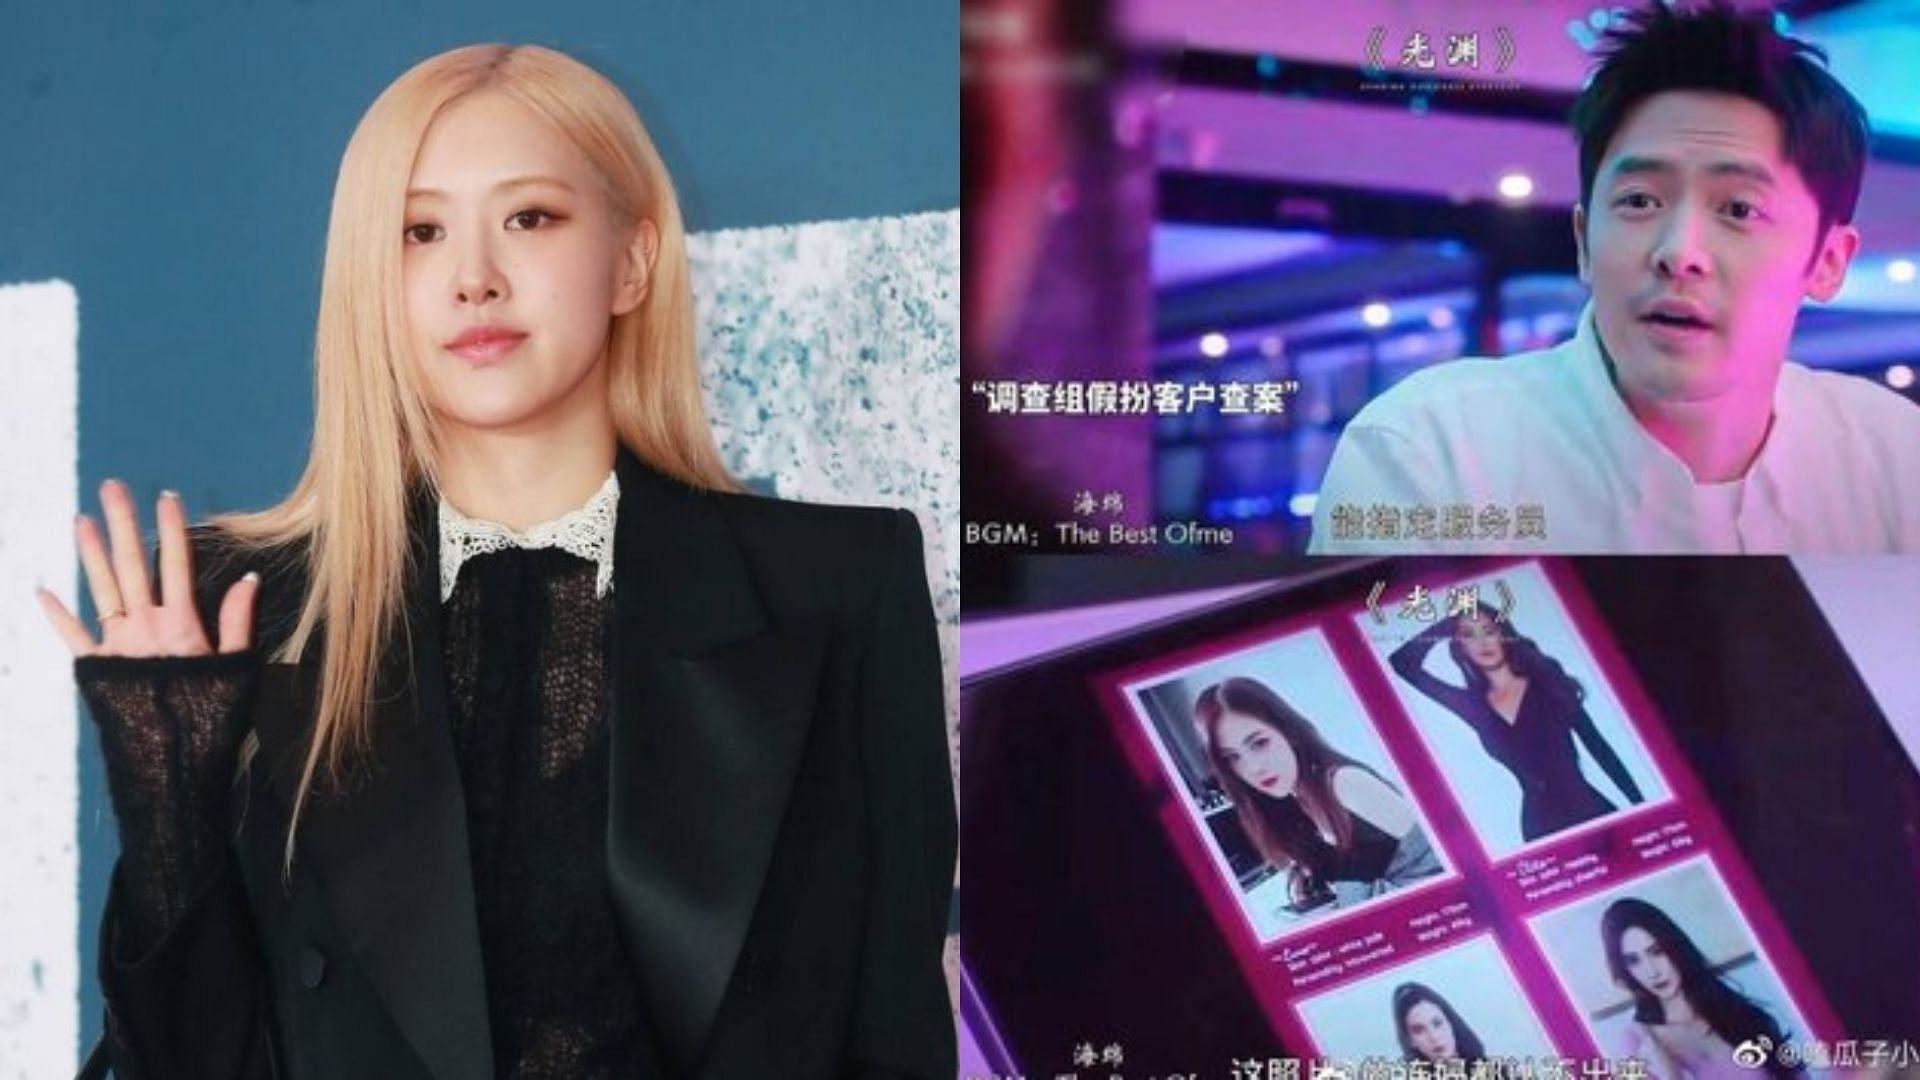  BLACKPINK&rsquo;s Ros&eacute;&rsquo;s fans slam C-drama Justice in the Dark for depicting the singer as a sex worker (Image via Twtter/@pannkpop)